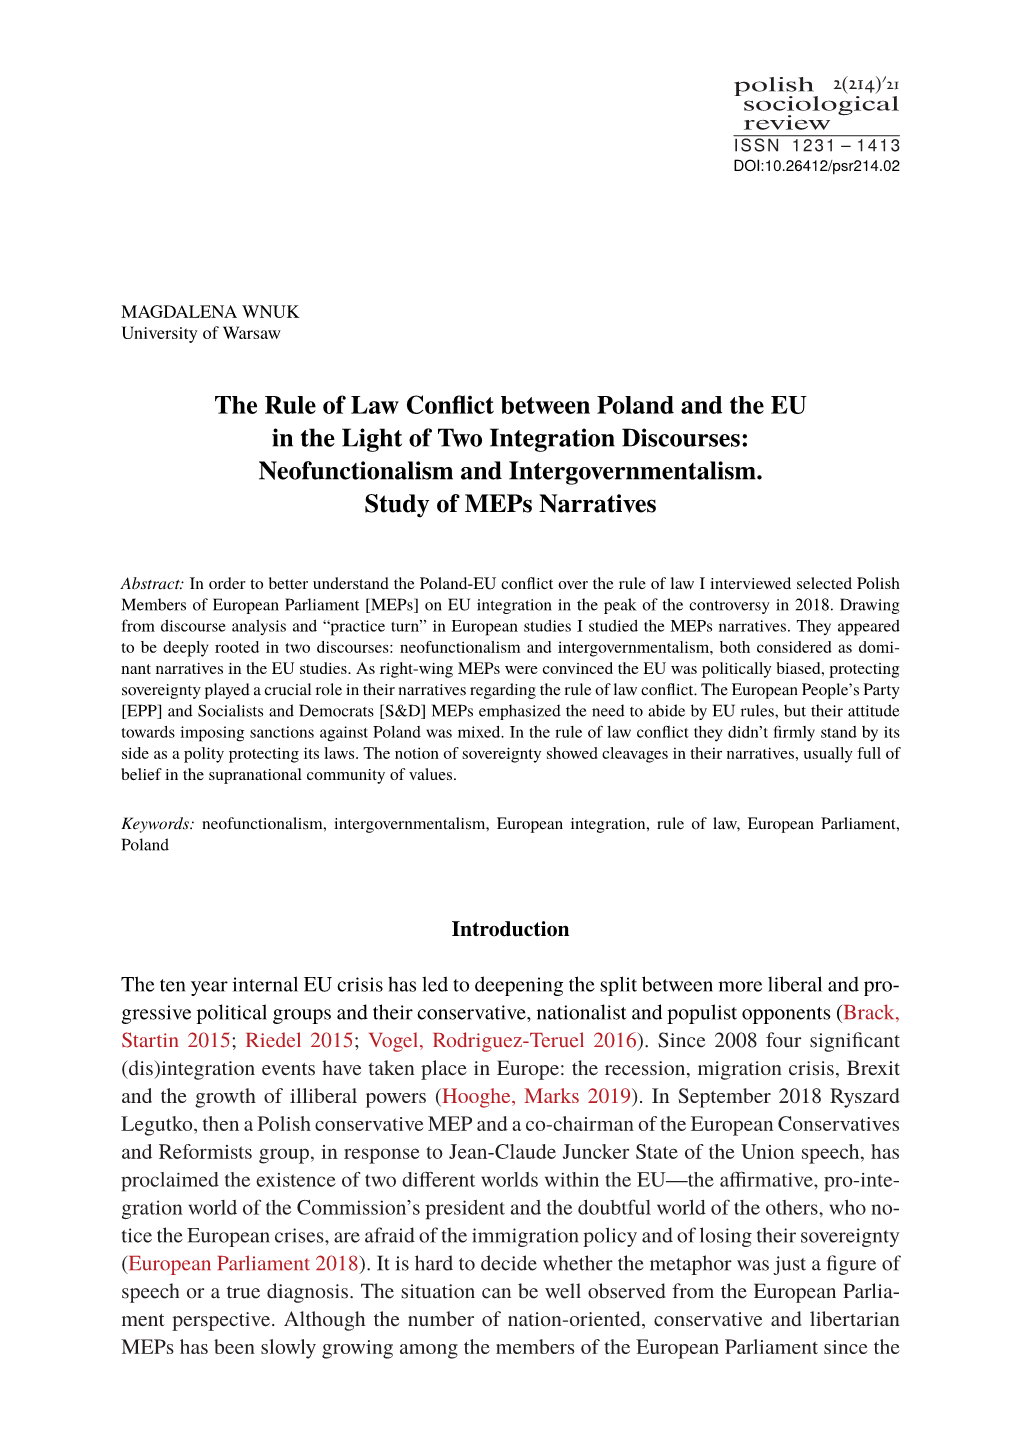 The Rule of Law Conflict Between Poland and the EU in the Light of Two Integration Discourses: Neofunctionalism and Intergovernmentalism